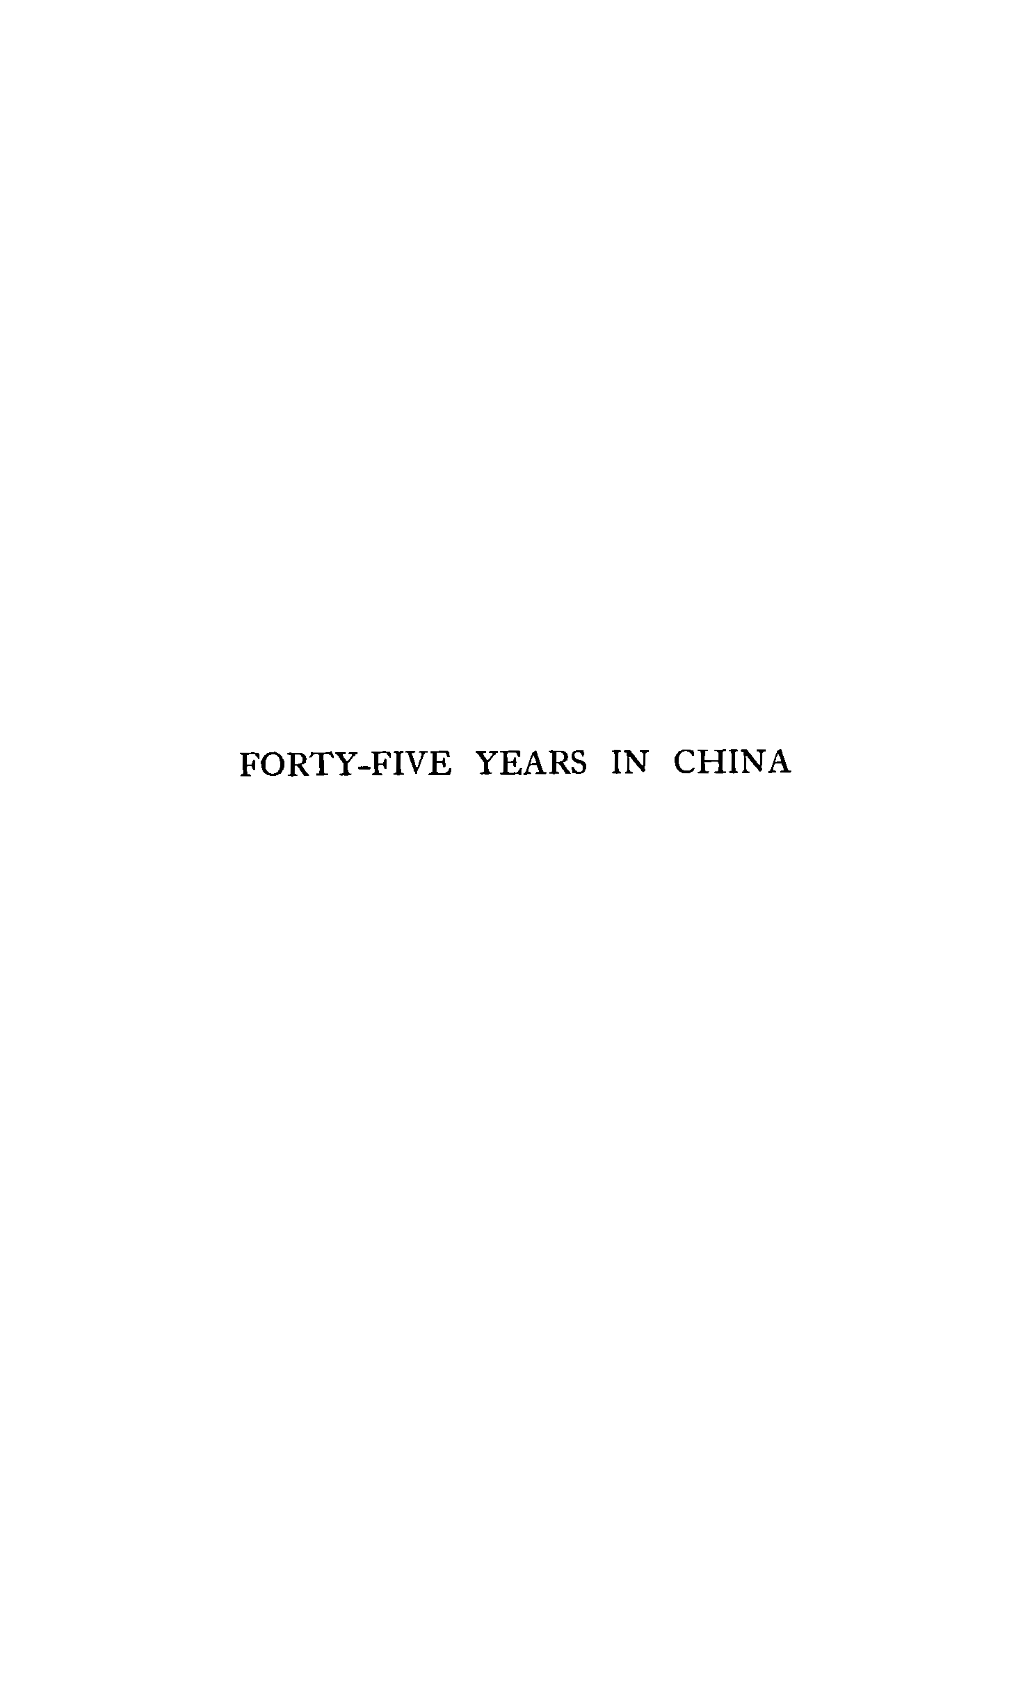 FORTY-FIVE YEARS in CHINA TIMOTHY RICHARD at 6O